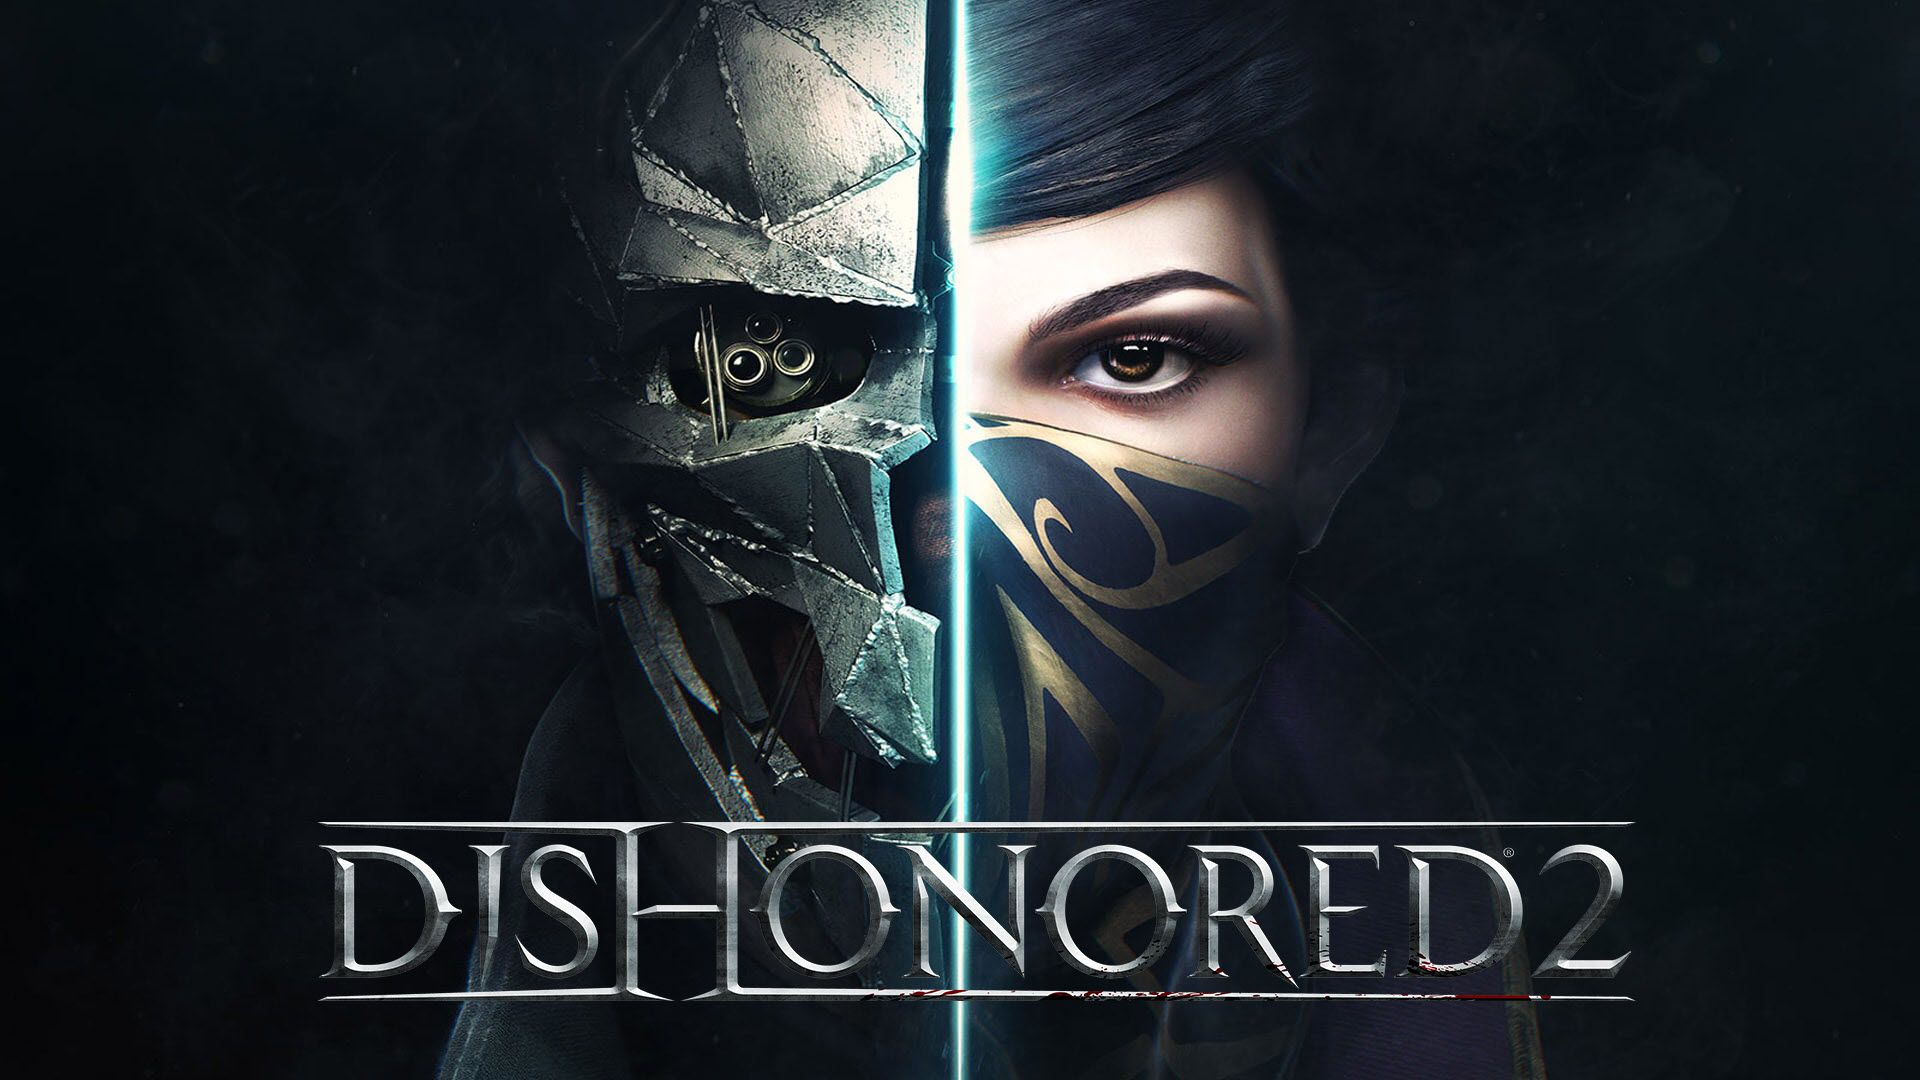 dishonored 2 review ps4